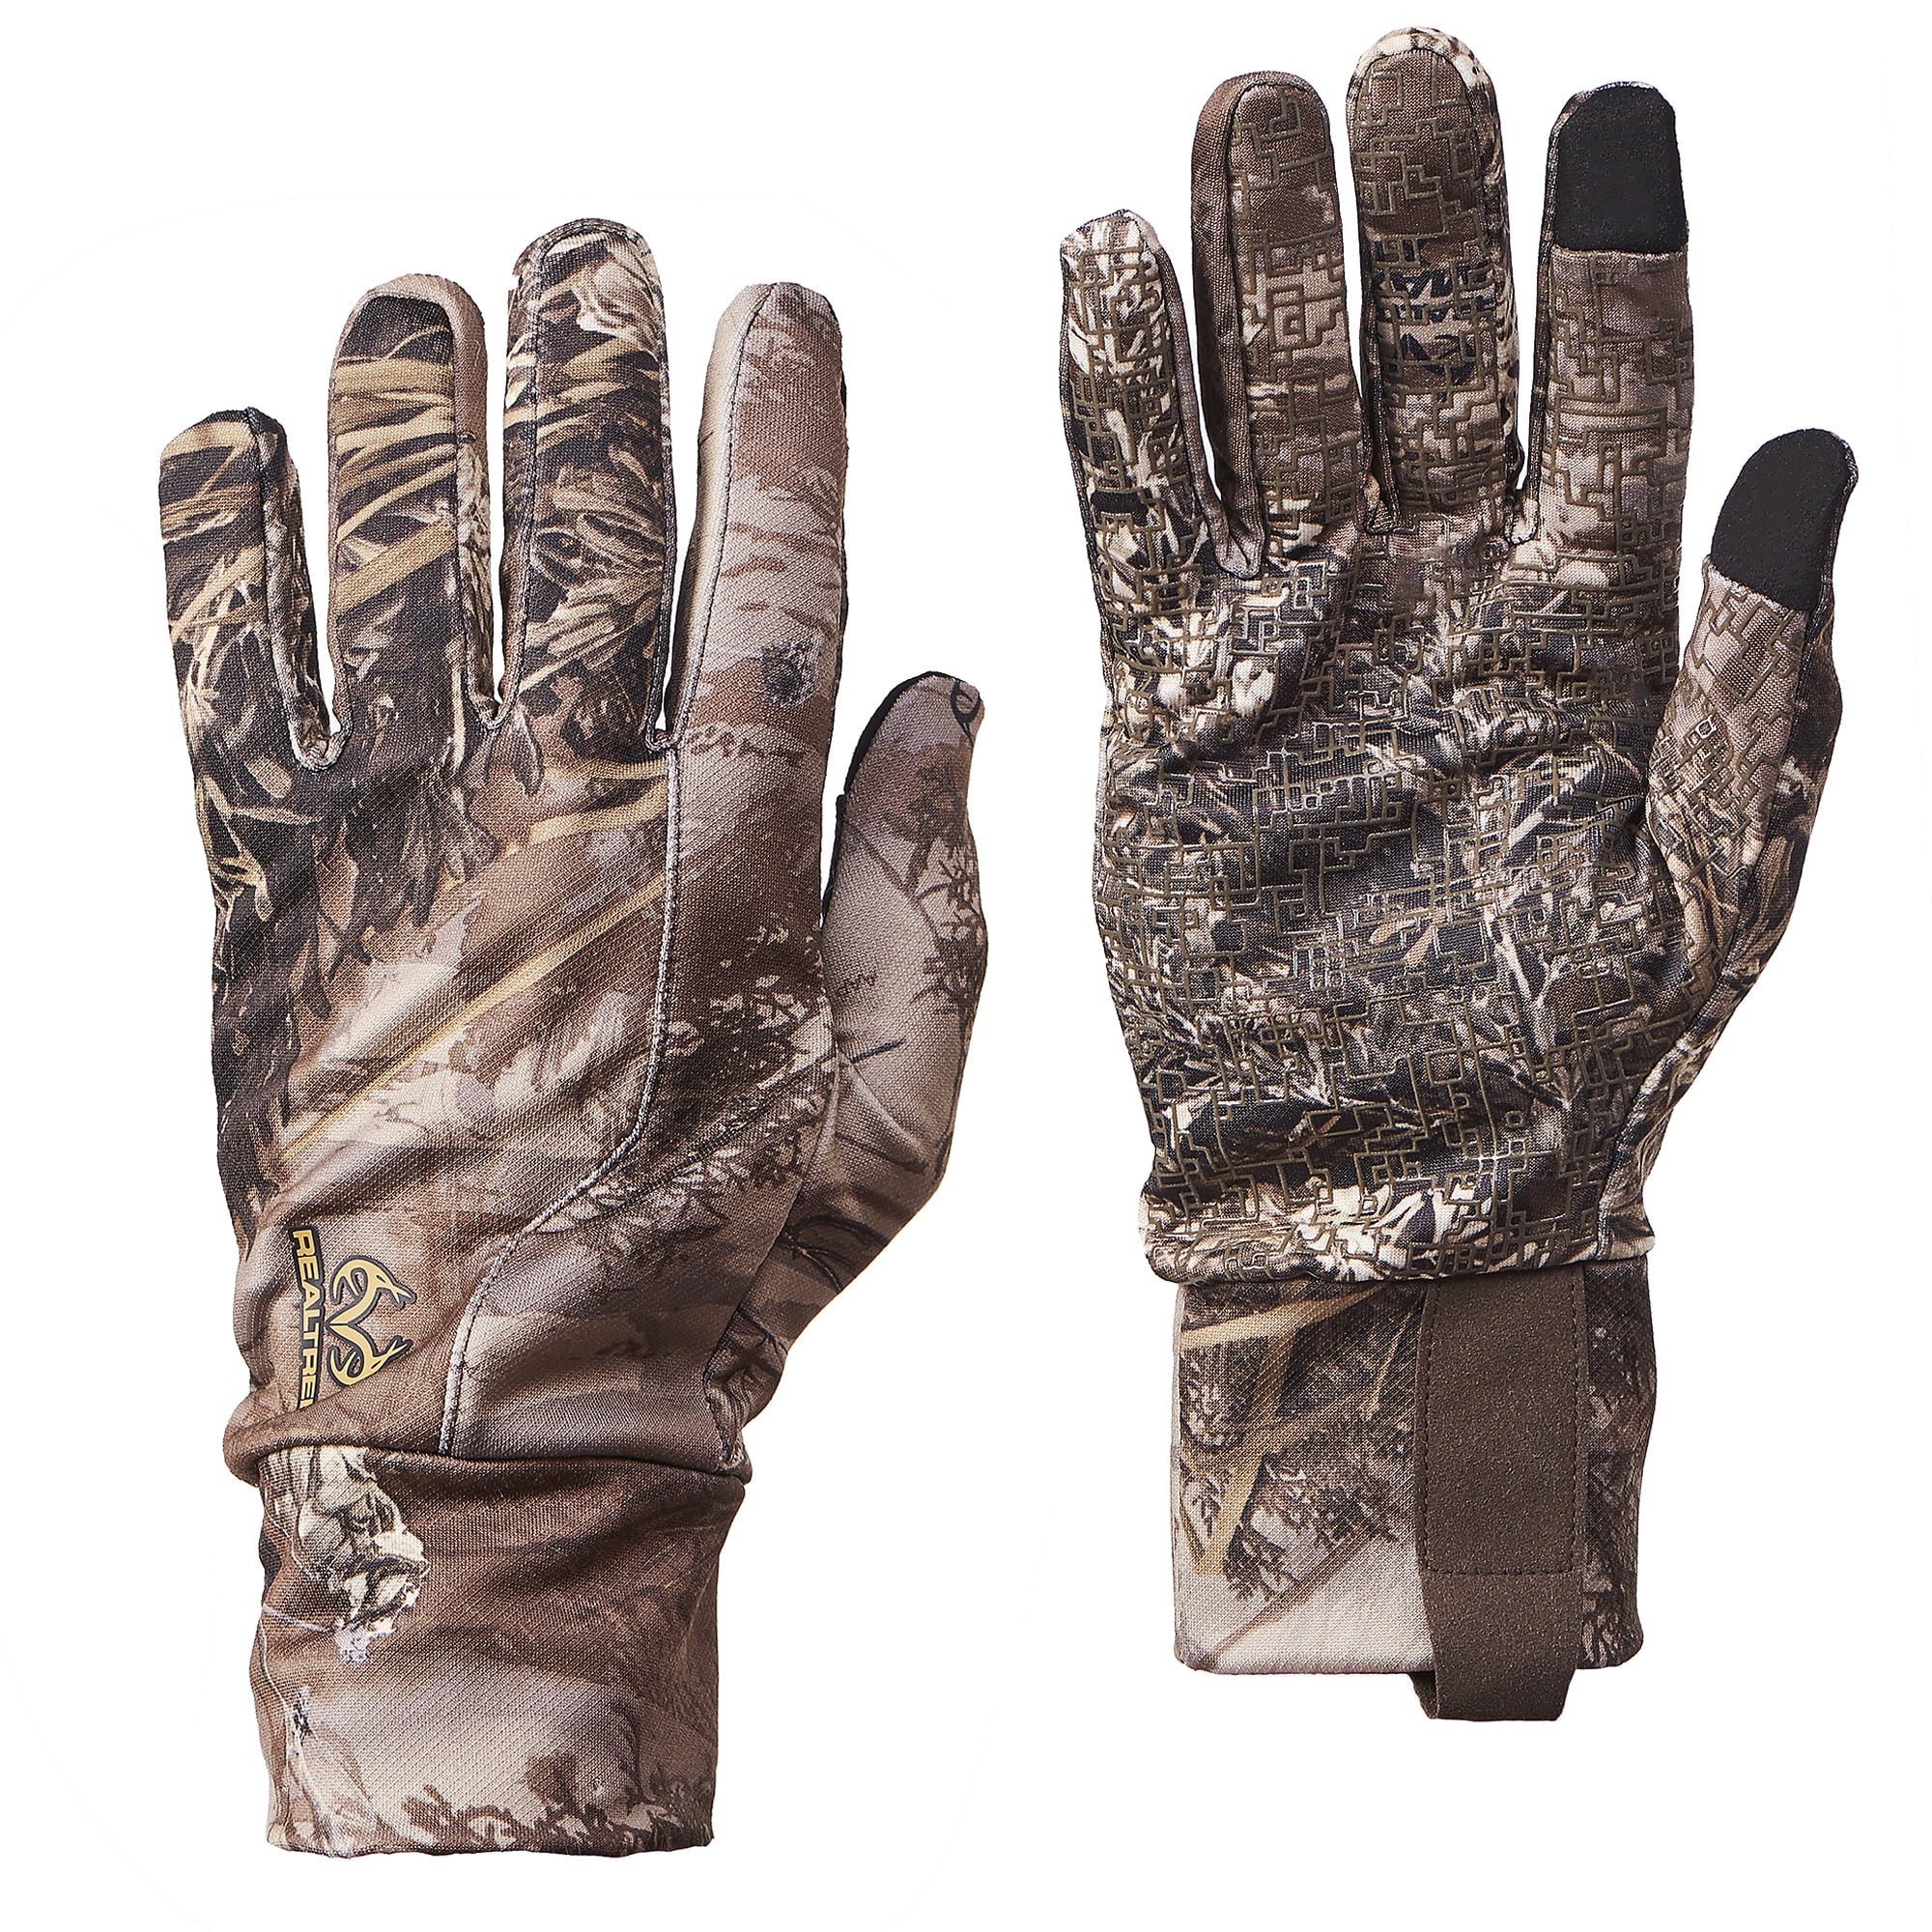 REALTREE ARCHERY HUNTING CAMOUFLAGE JERSEY GLOVES BREAK-UP COUNTRY S/M L/ XL 